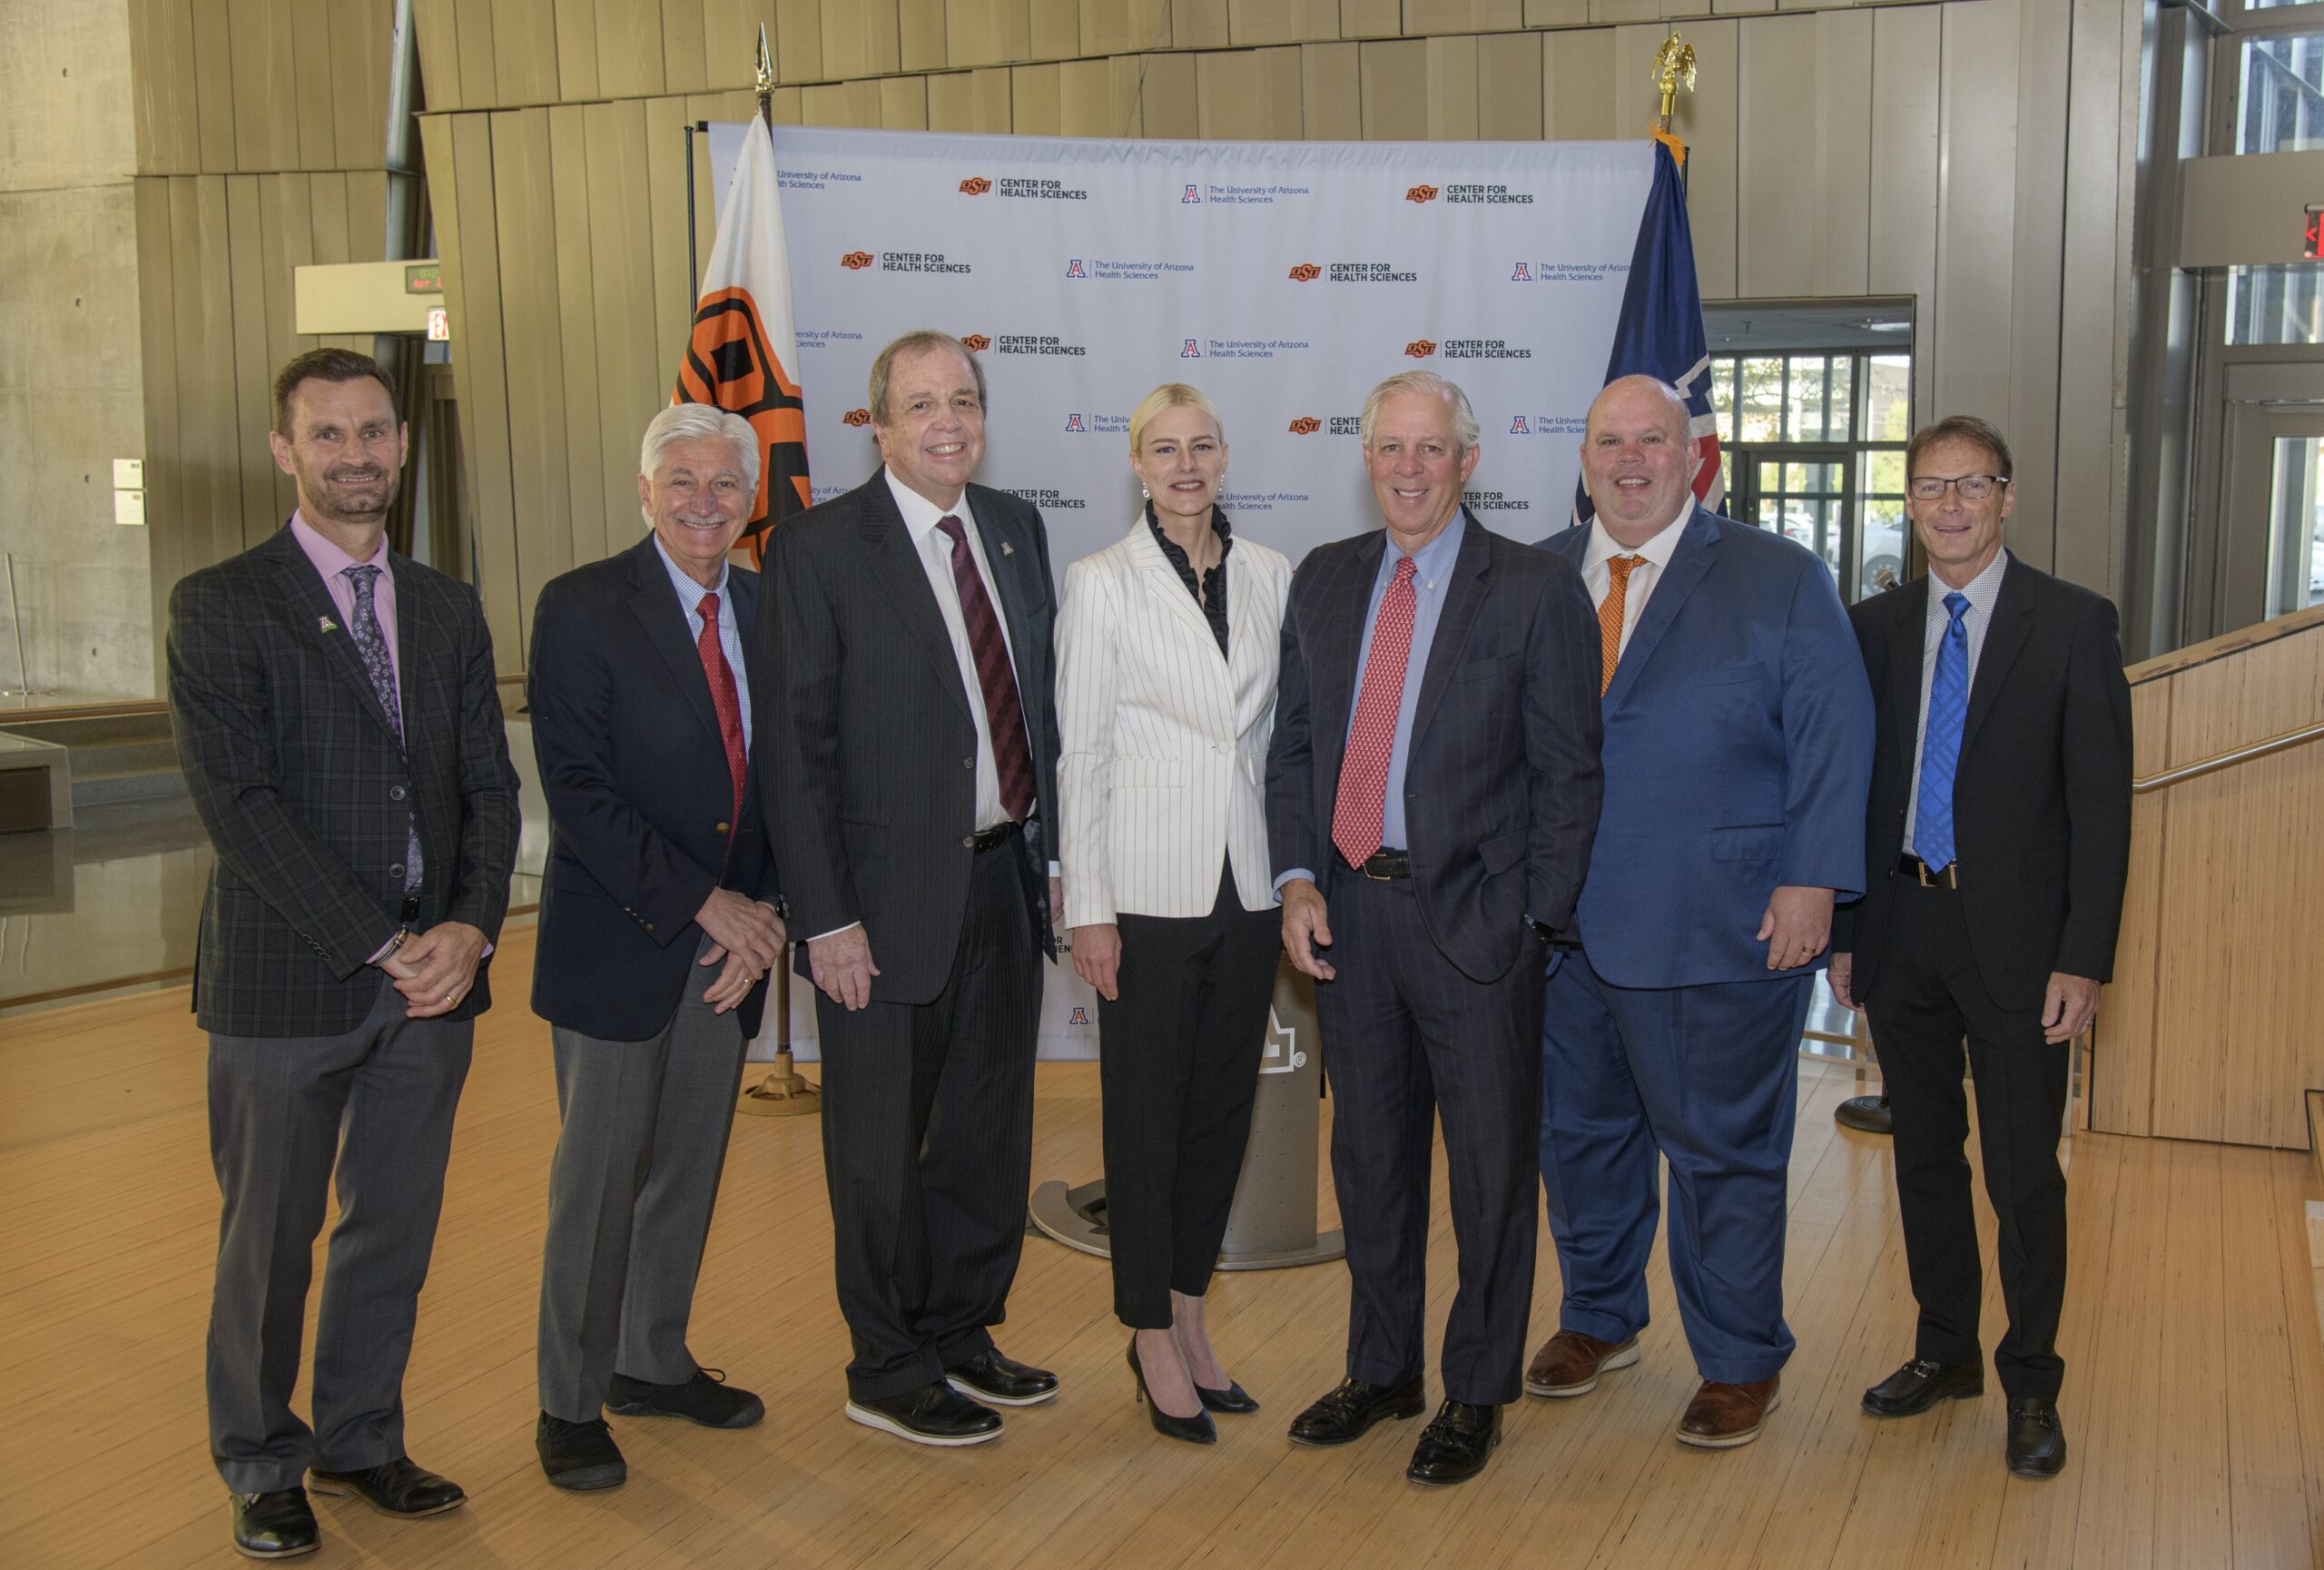 Dr. Kayse Shrum, president of Oklahoma State University and Dr. Robert C. Robbins, president of the University of Arizona today announced the two institutions’ academic medical centers have joined forces to combat the opioid crisis and chronic pain through research, treatment and education.